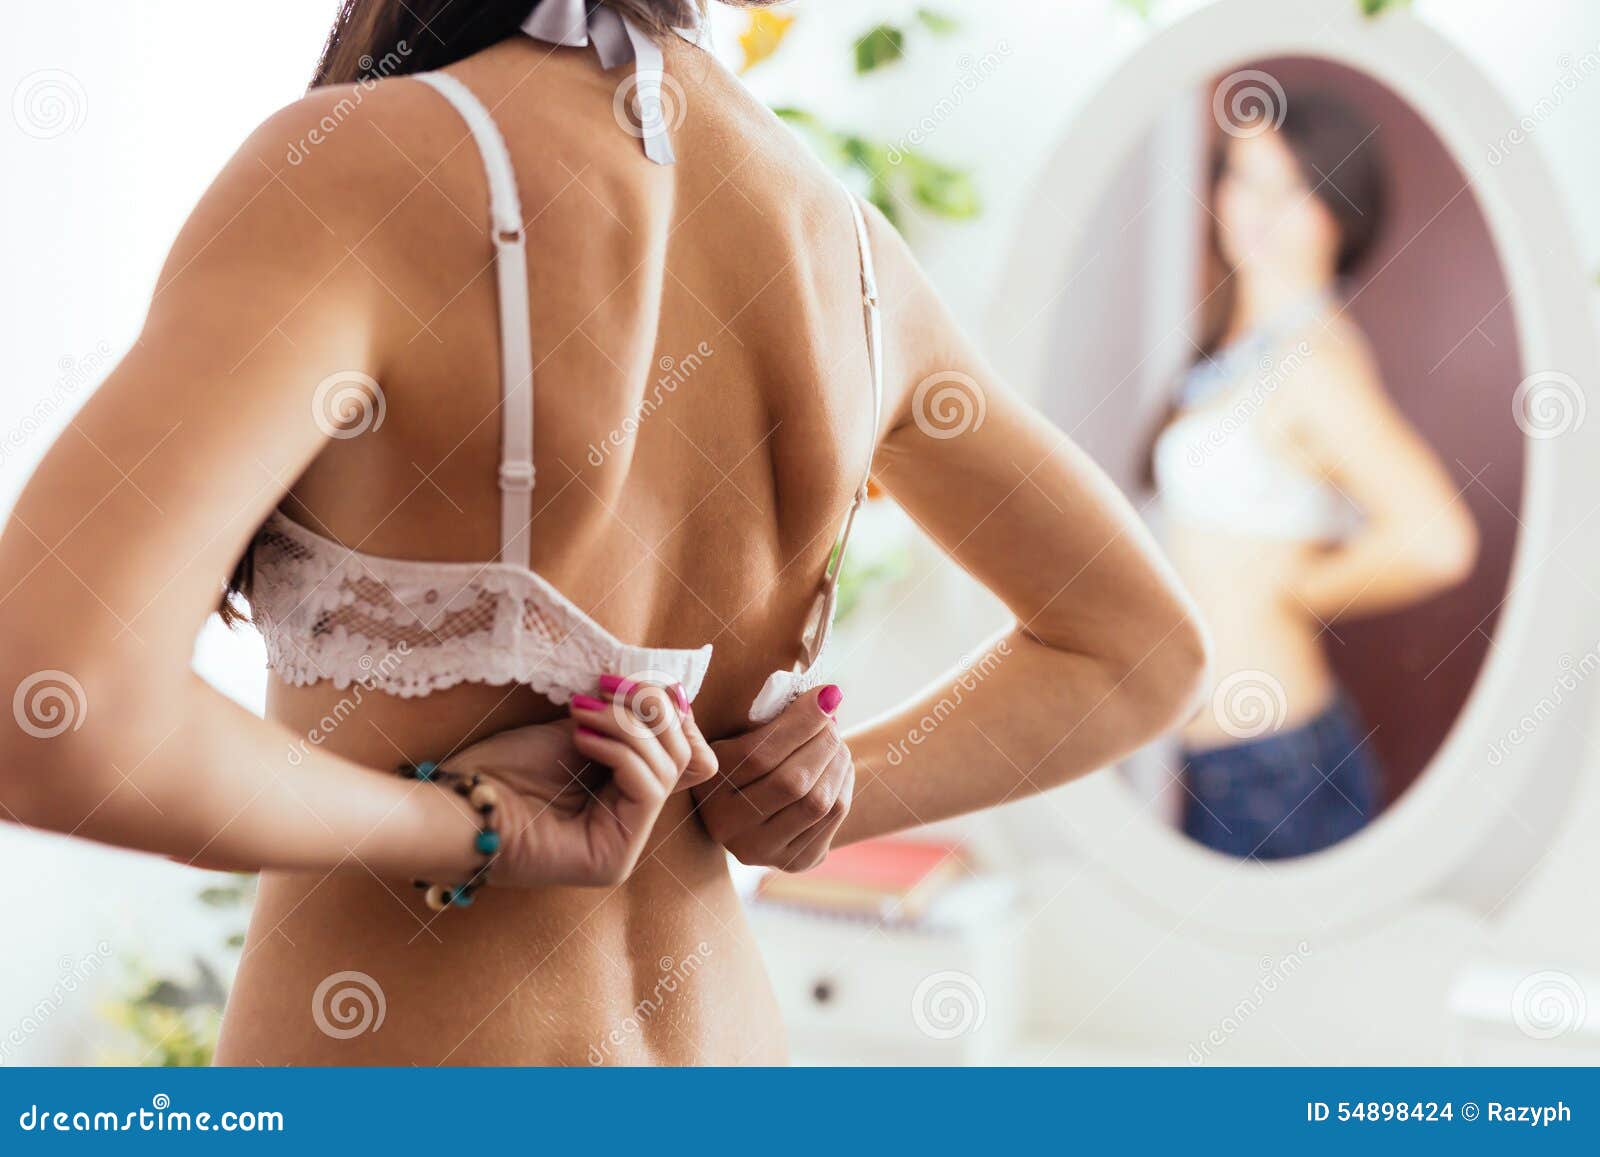 https://thumbs.dreamstime.com/z/woman-taking-off-her-bra-closeup-back-view-unhooking-clasp-white-looking-mirror-54898424.jpg